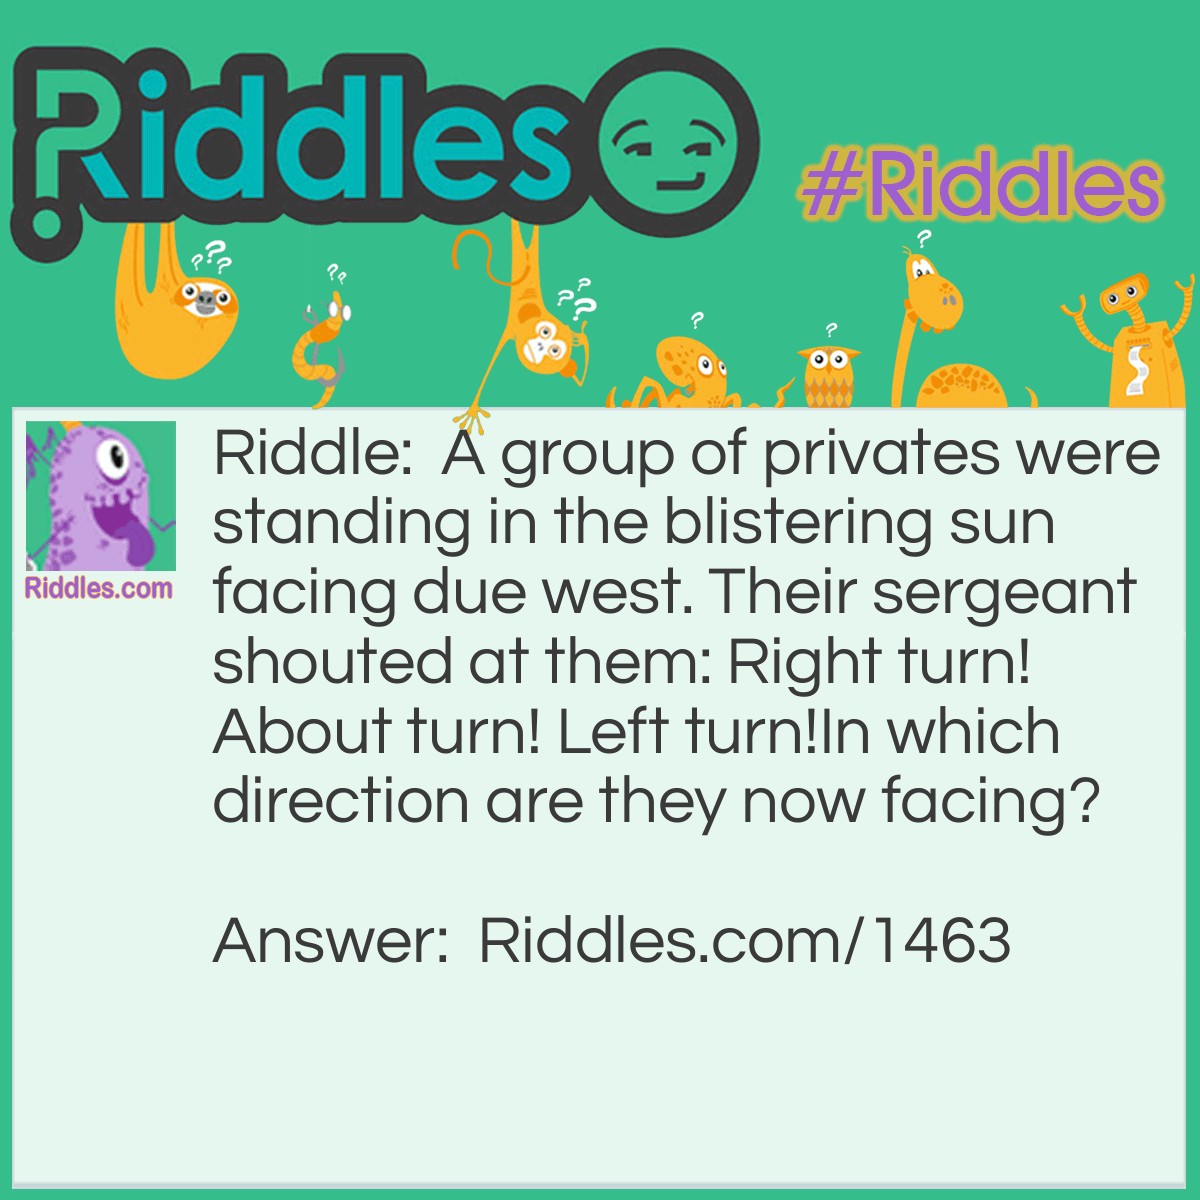 Riddle: A group of privates were standing in the blistering sun facing due west. Their sergeant shouted at them: Right turn! About turn! Left turn!
In which direction are they now facing? Answer: East.